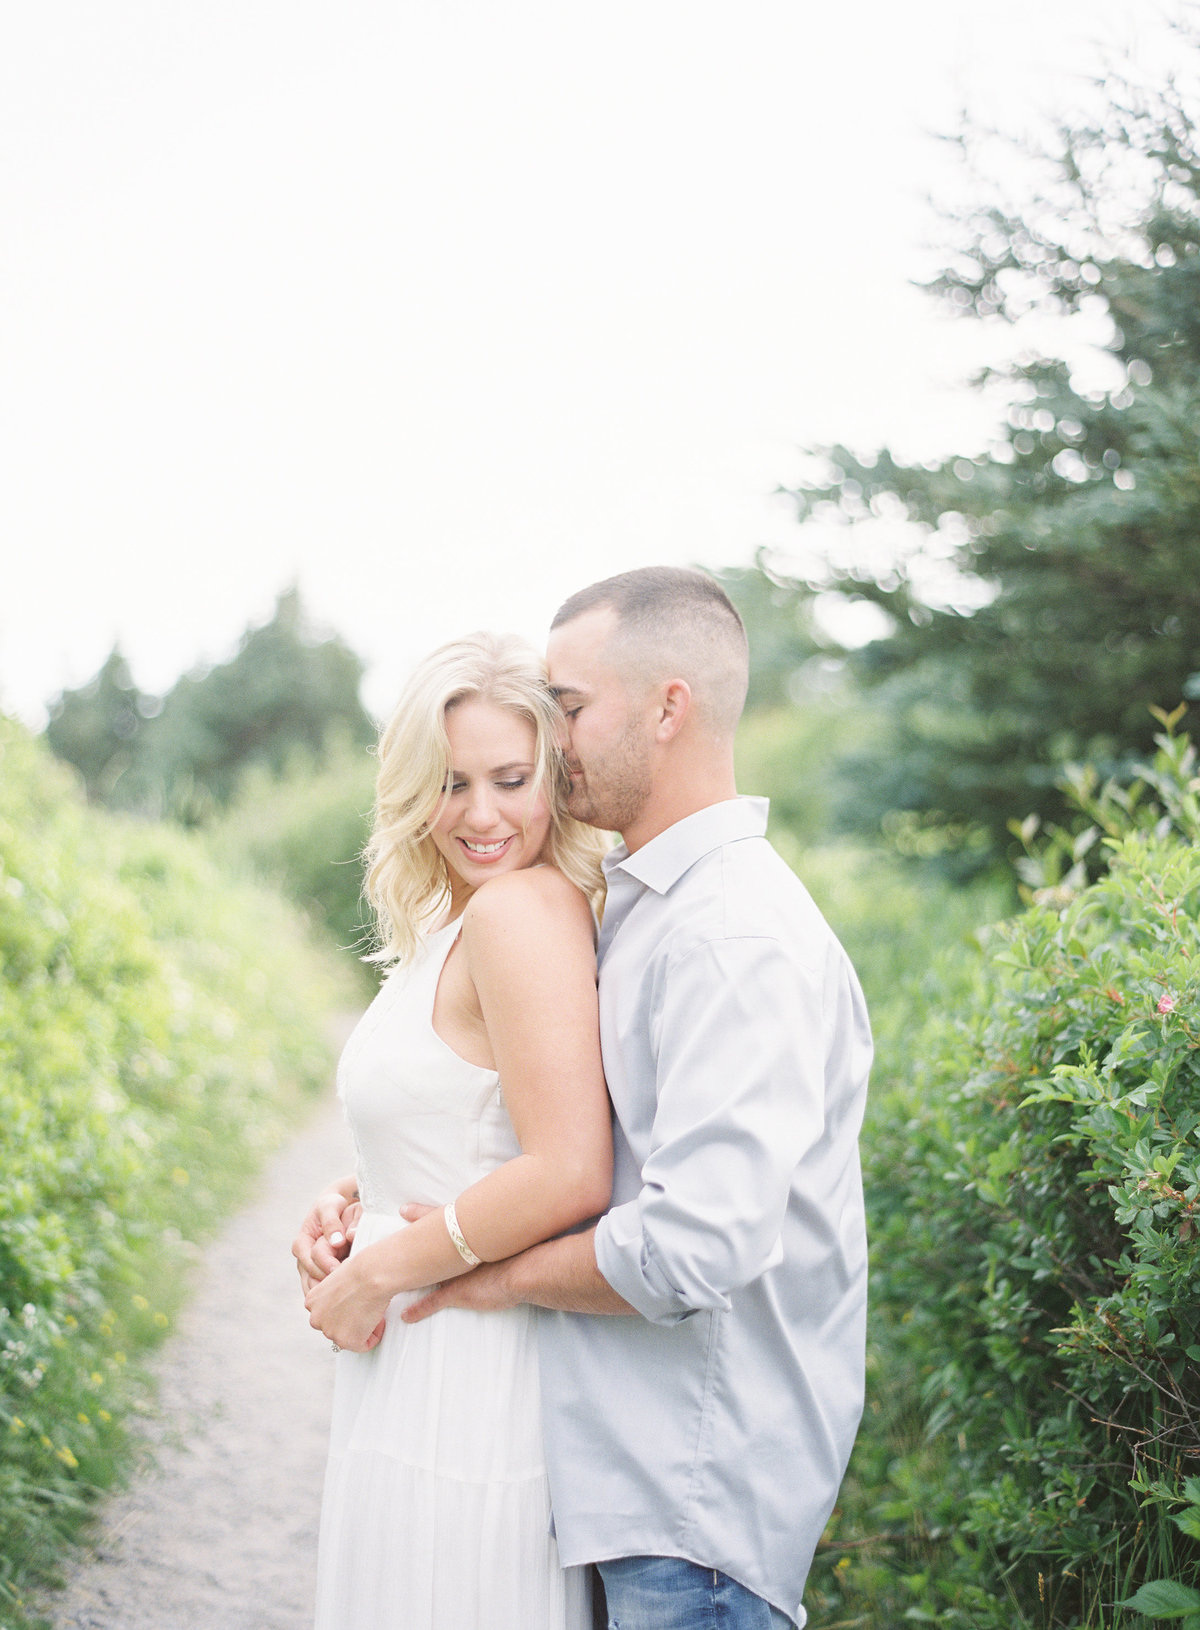 Jacqueline Anne Photography  - Hailey and Shea - Crystal Crescent Beach Engagement-11